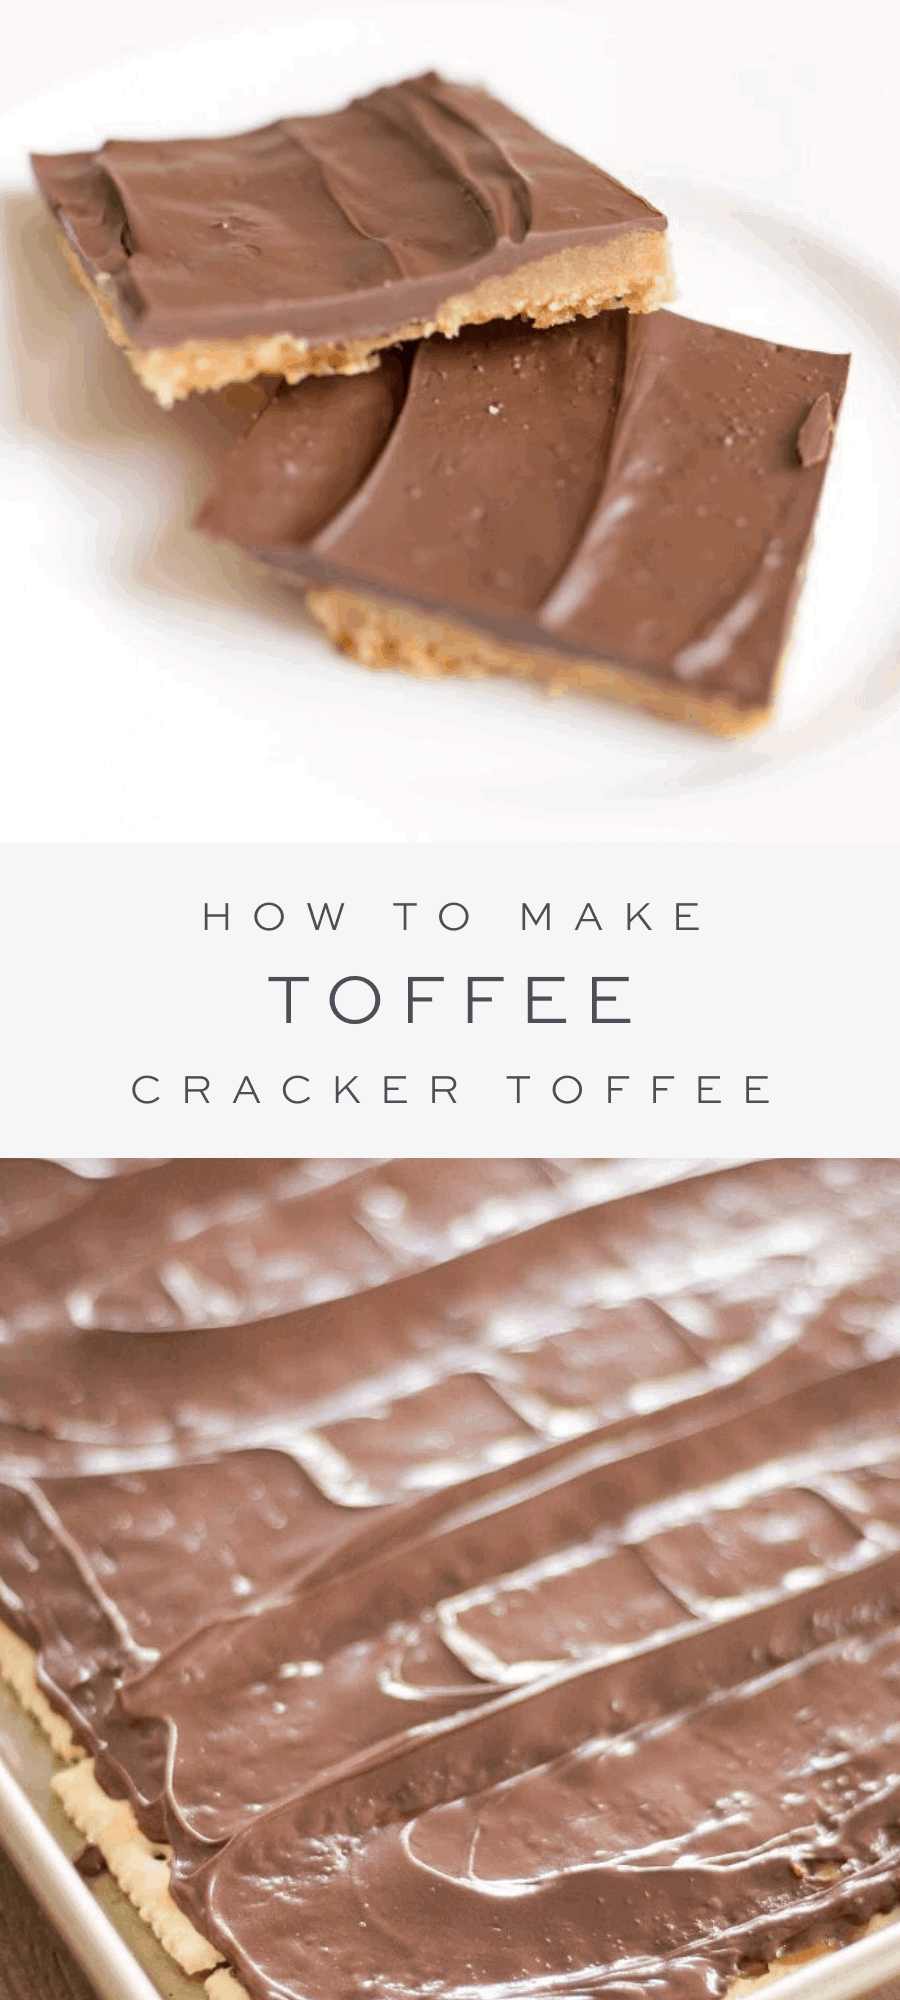 How to Make Toffee - Easy Cracker Toffee with Video ...